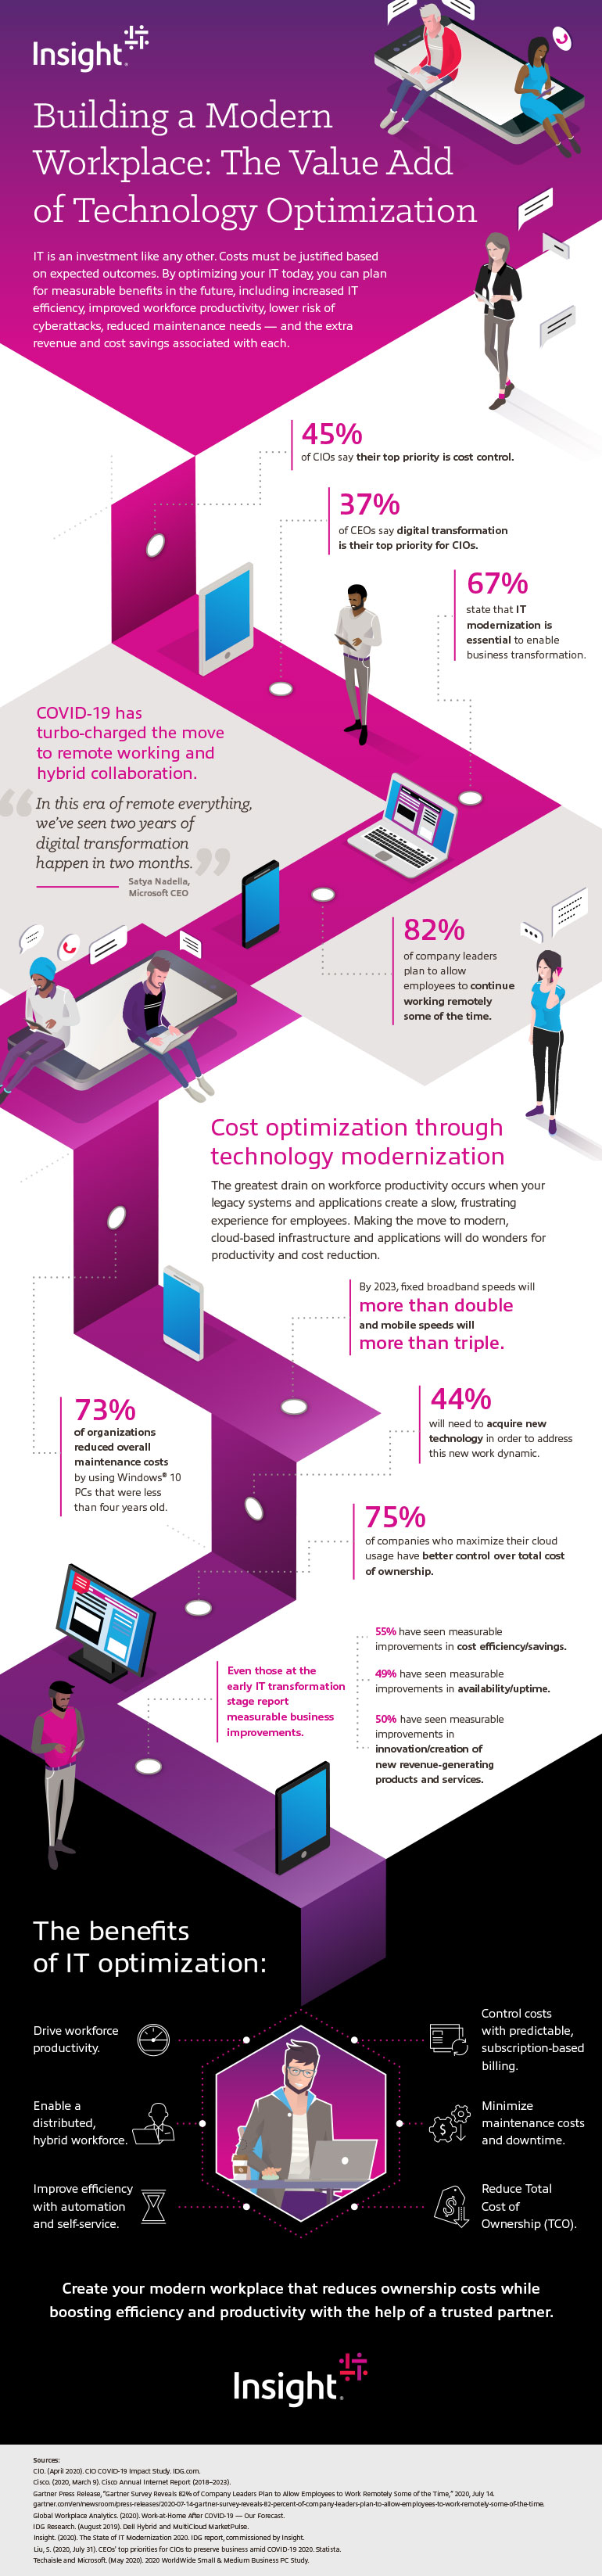 Building a Modern Workplace: The Value Add of Technology Optimization infographic